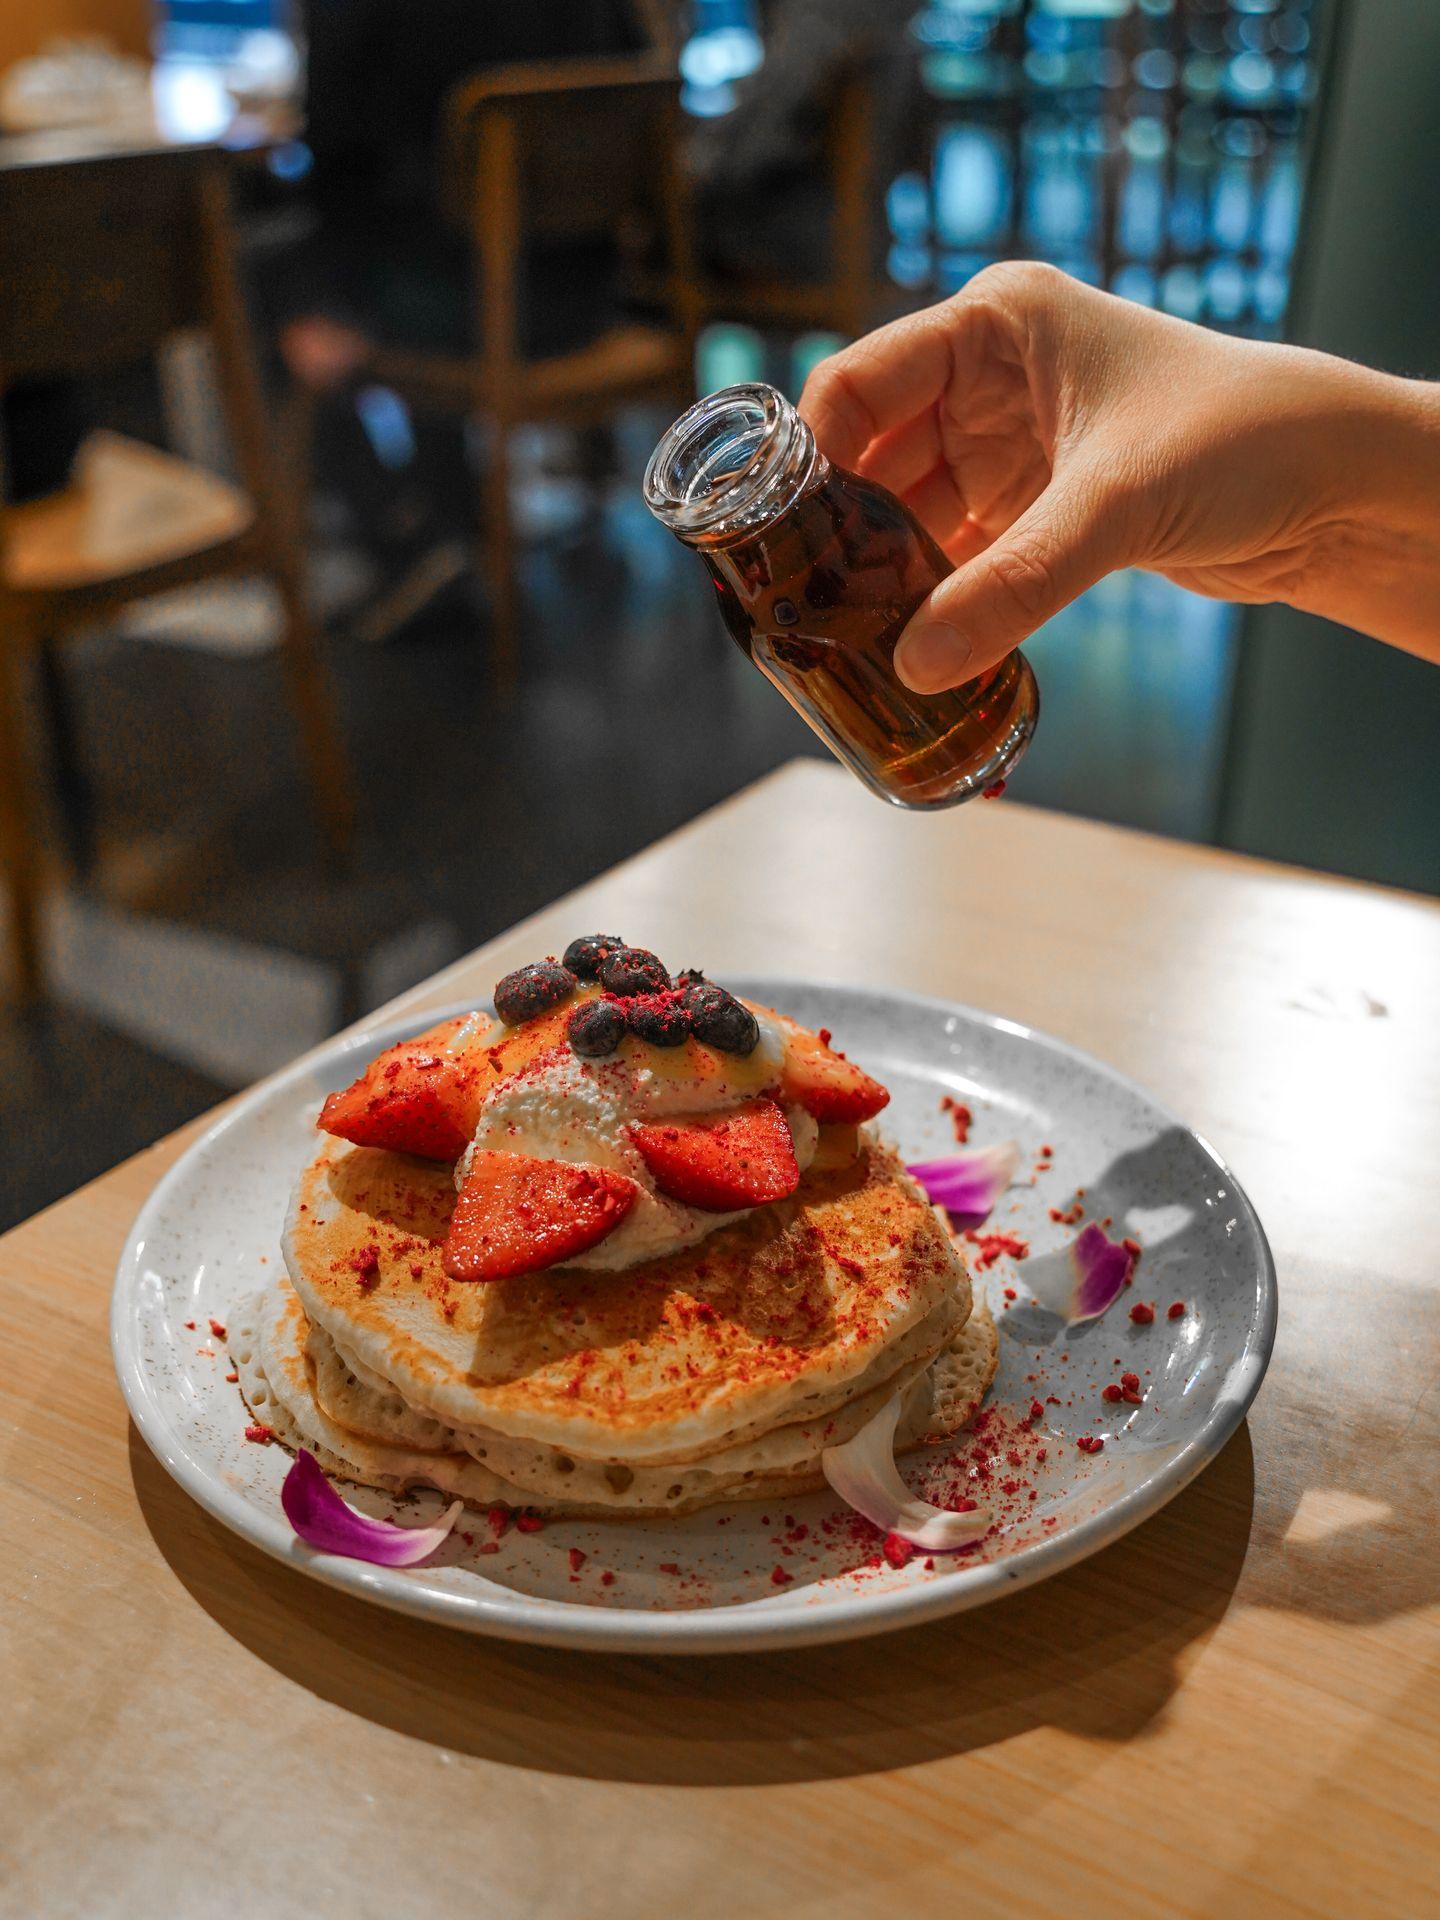 Holding up syrup over a plate of lemon ricotta pancakes